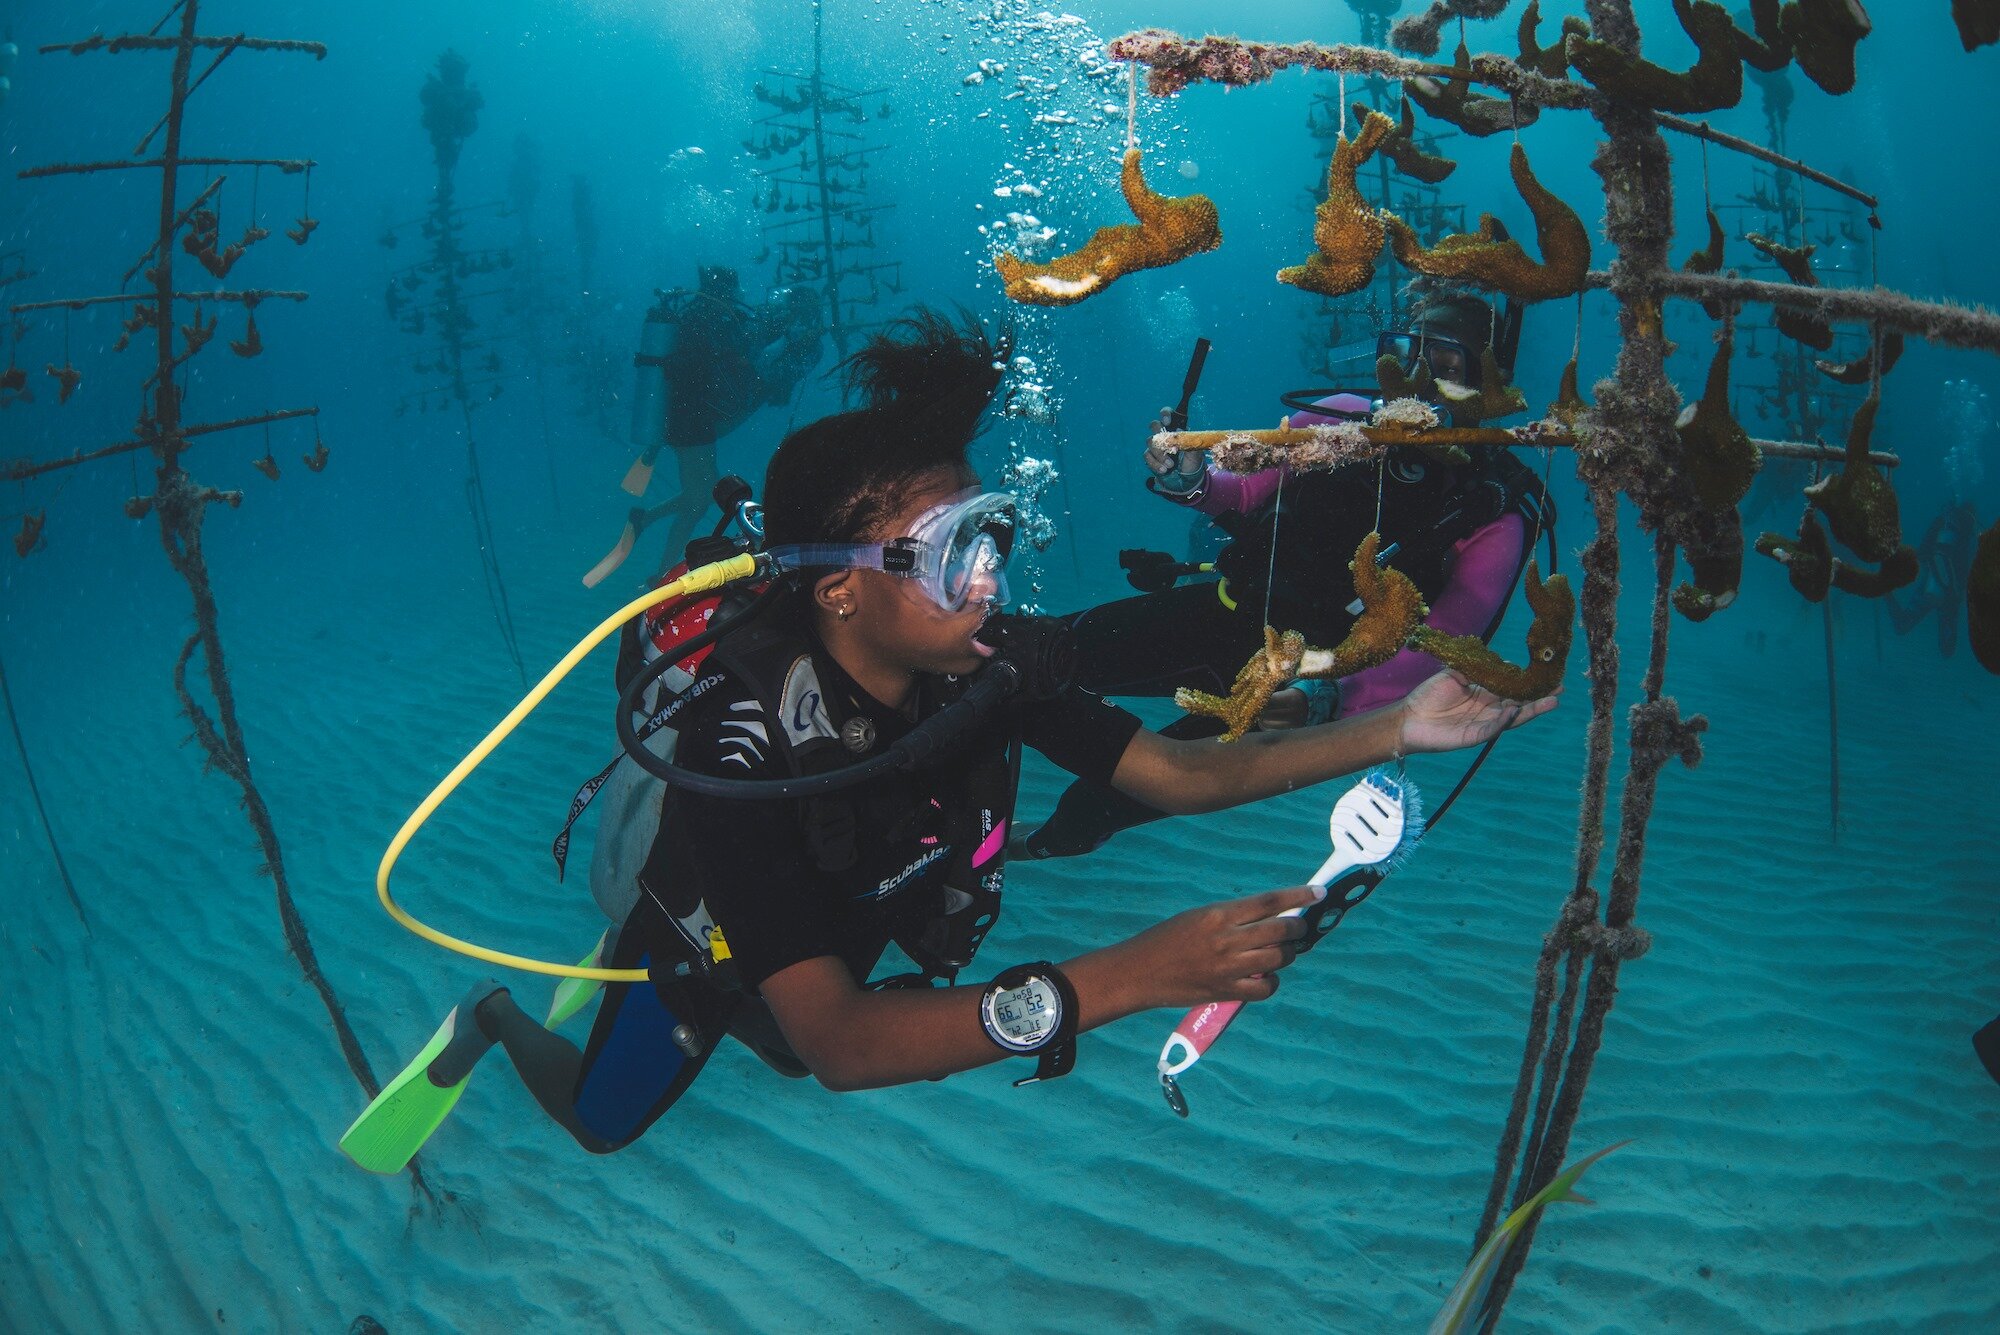 BGD Scholar Micaela cleaning coral branches